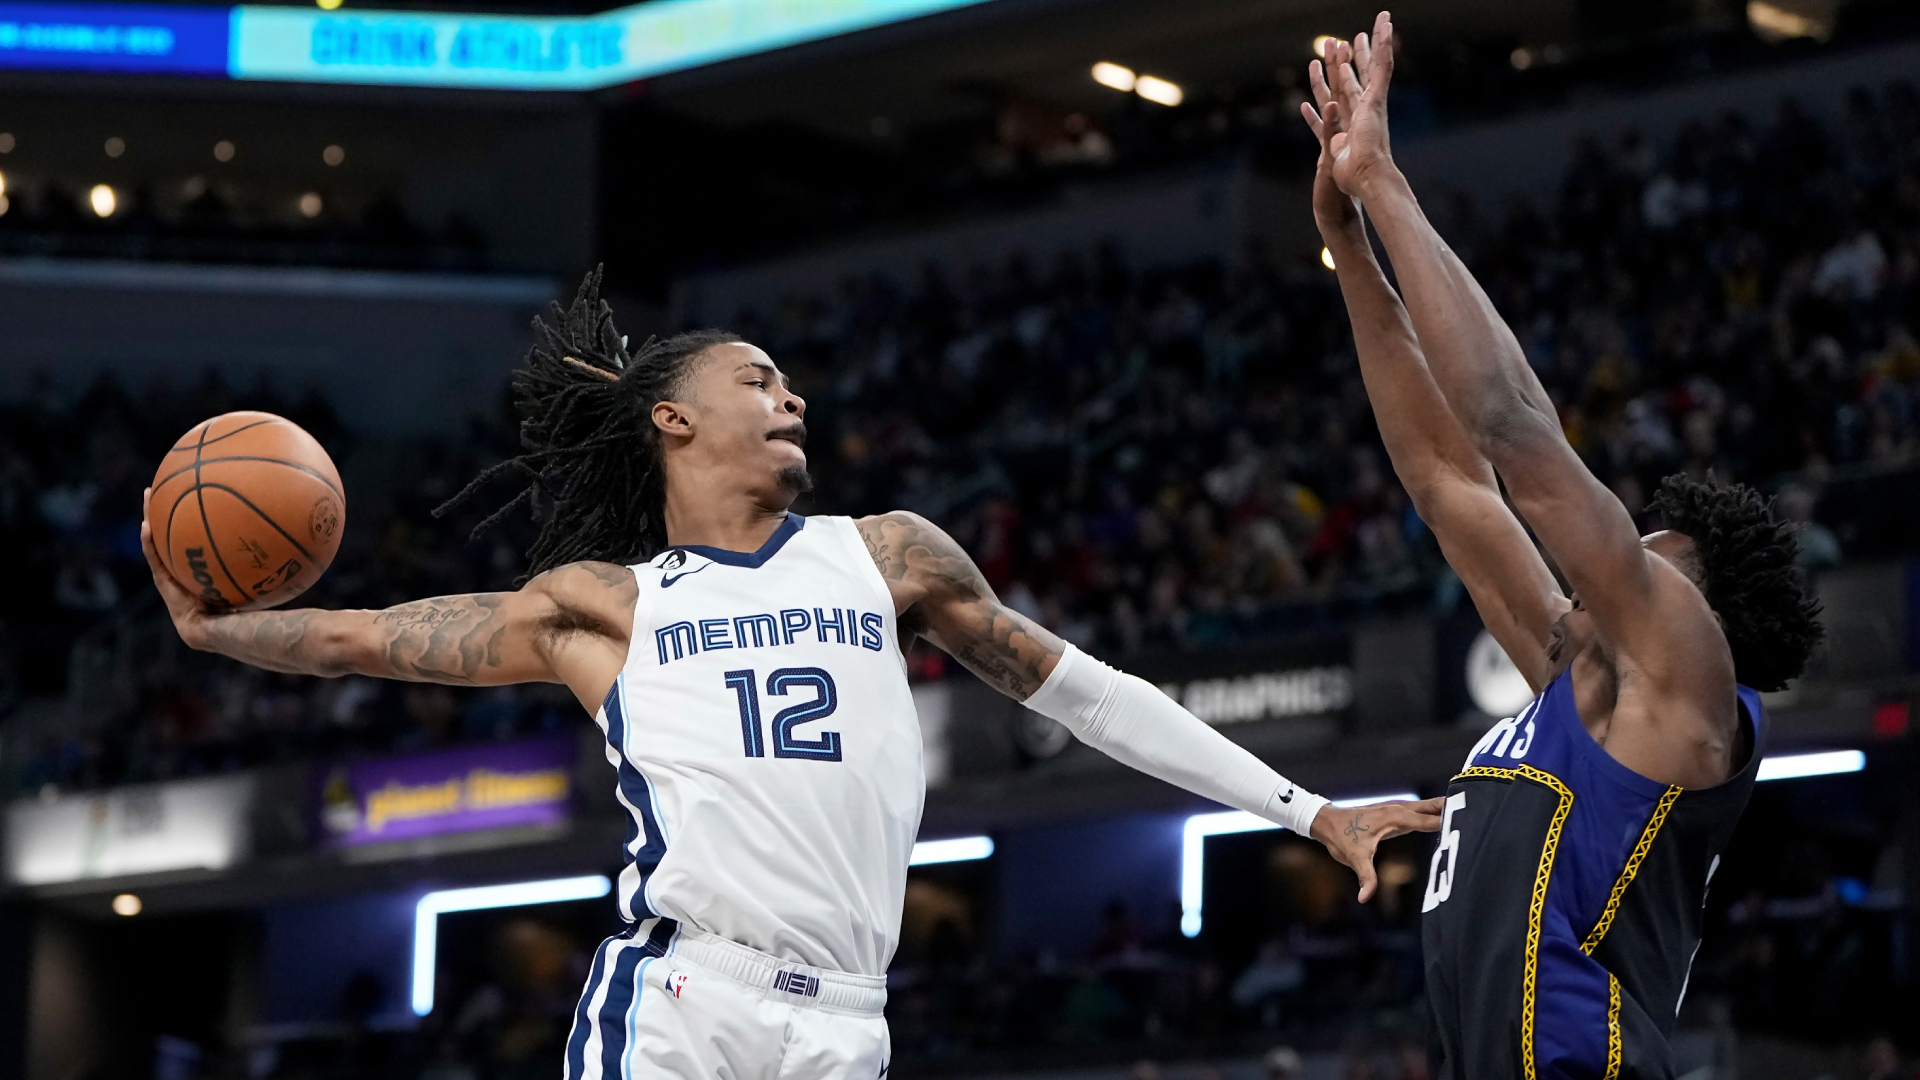 Kevin Durant, others react to Ja Morant's highlight poster dunk in Grizzlies win over Pacers